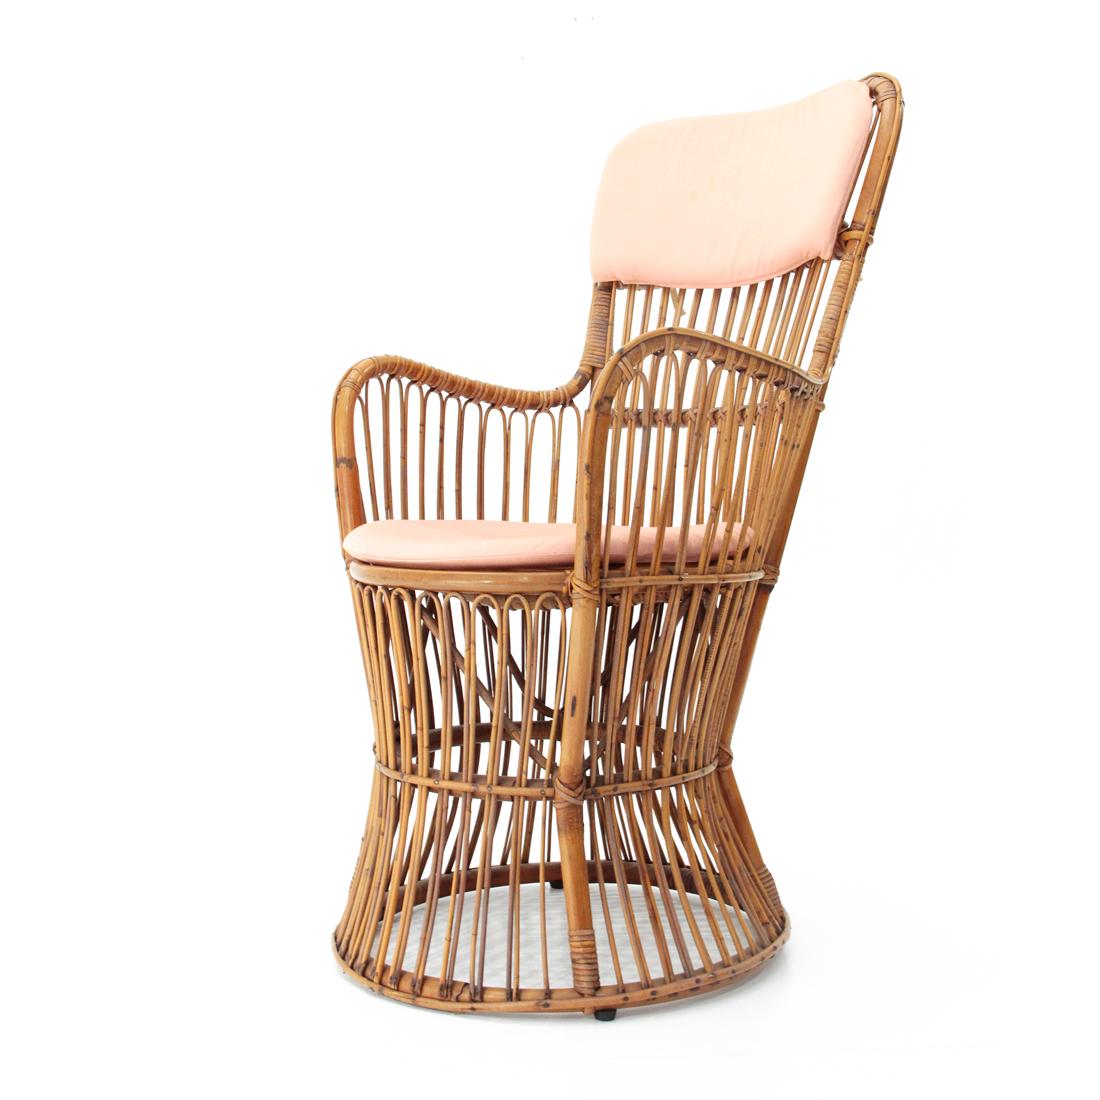 Mid-20th Century Italian Midcentury Rattan Armchair by Dal Vera, 1950s For Sale